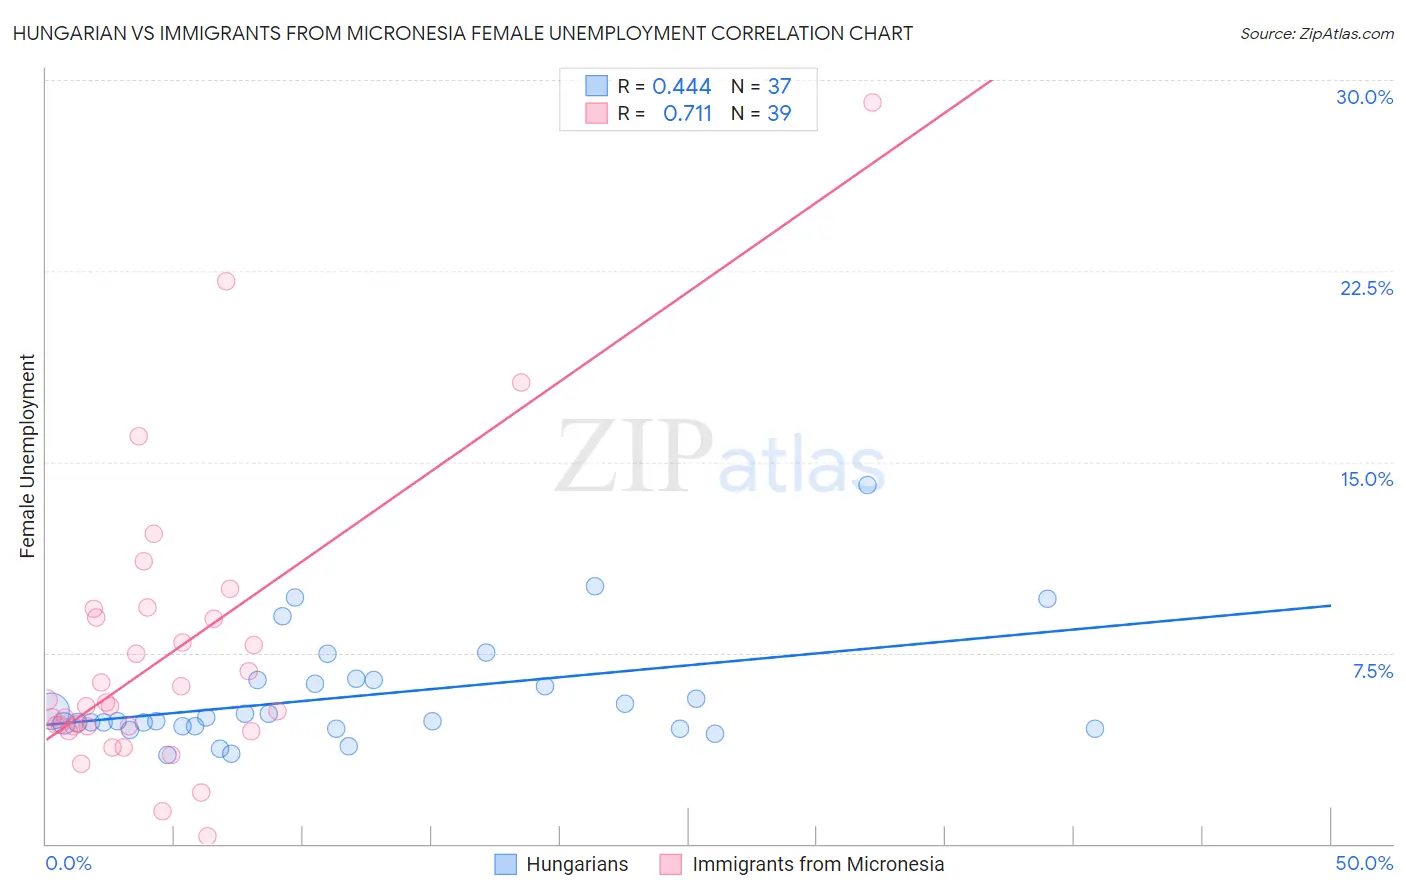 Hungarian vs Immigrants from Micronesia Female Unemployment